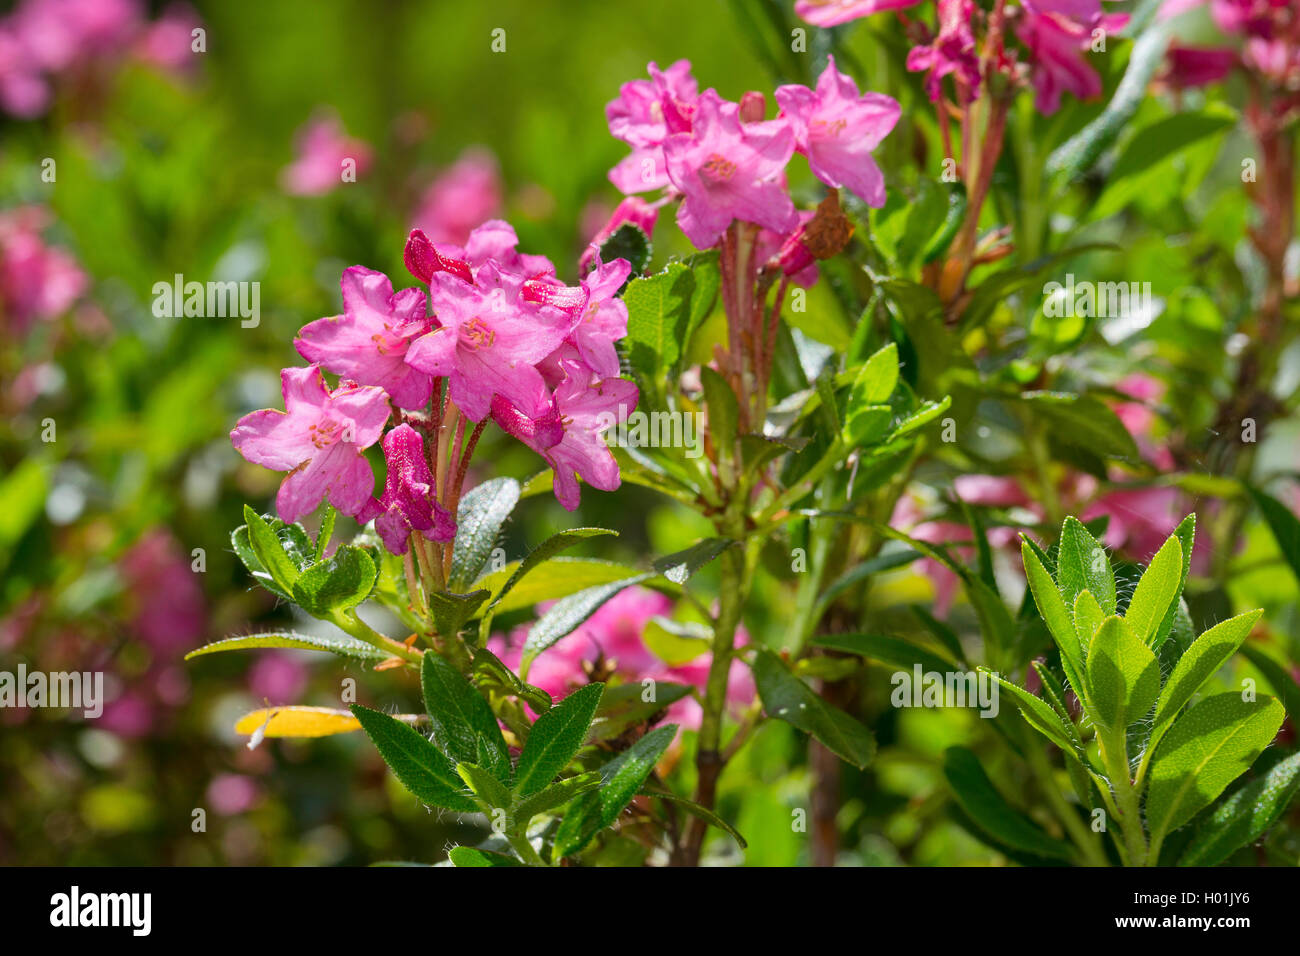 hairy alpine rose (Rhododendron hirsutum), blooming, Germany Stock Photo